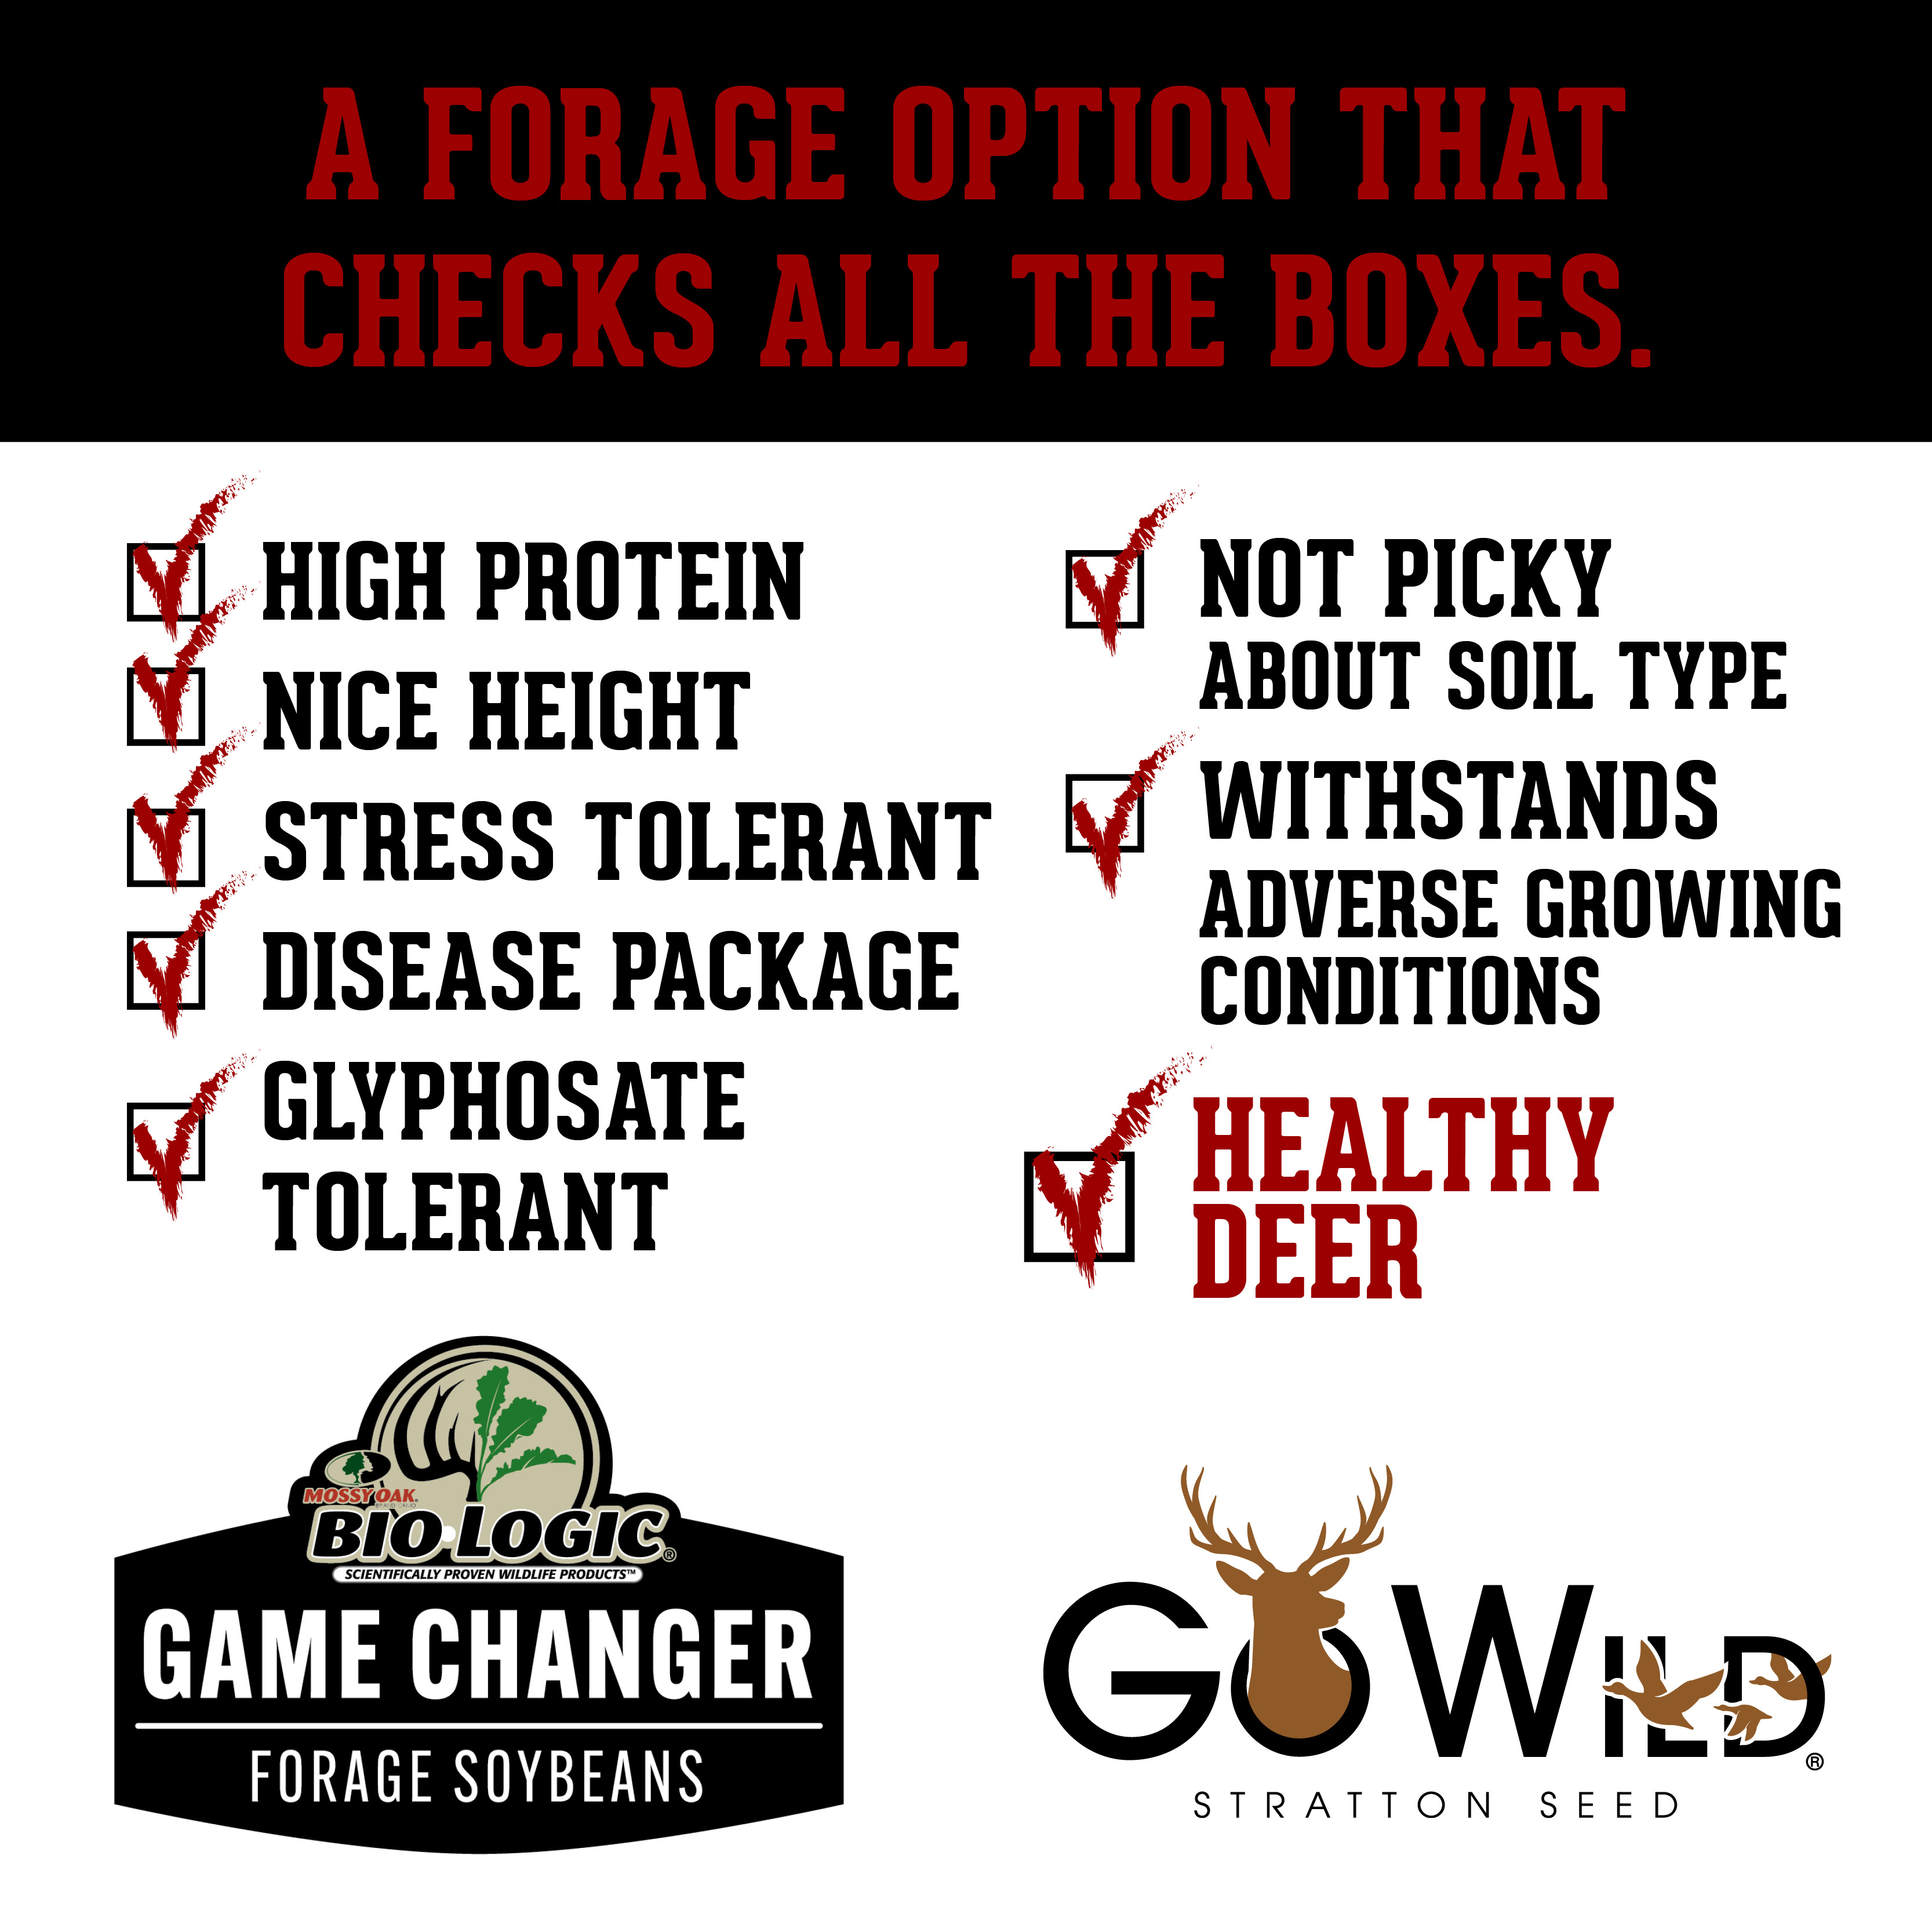 GoWild Social Media ad for Game Changer product